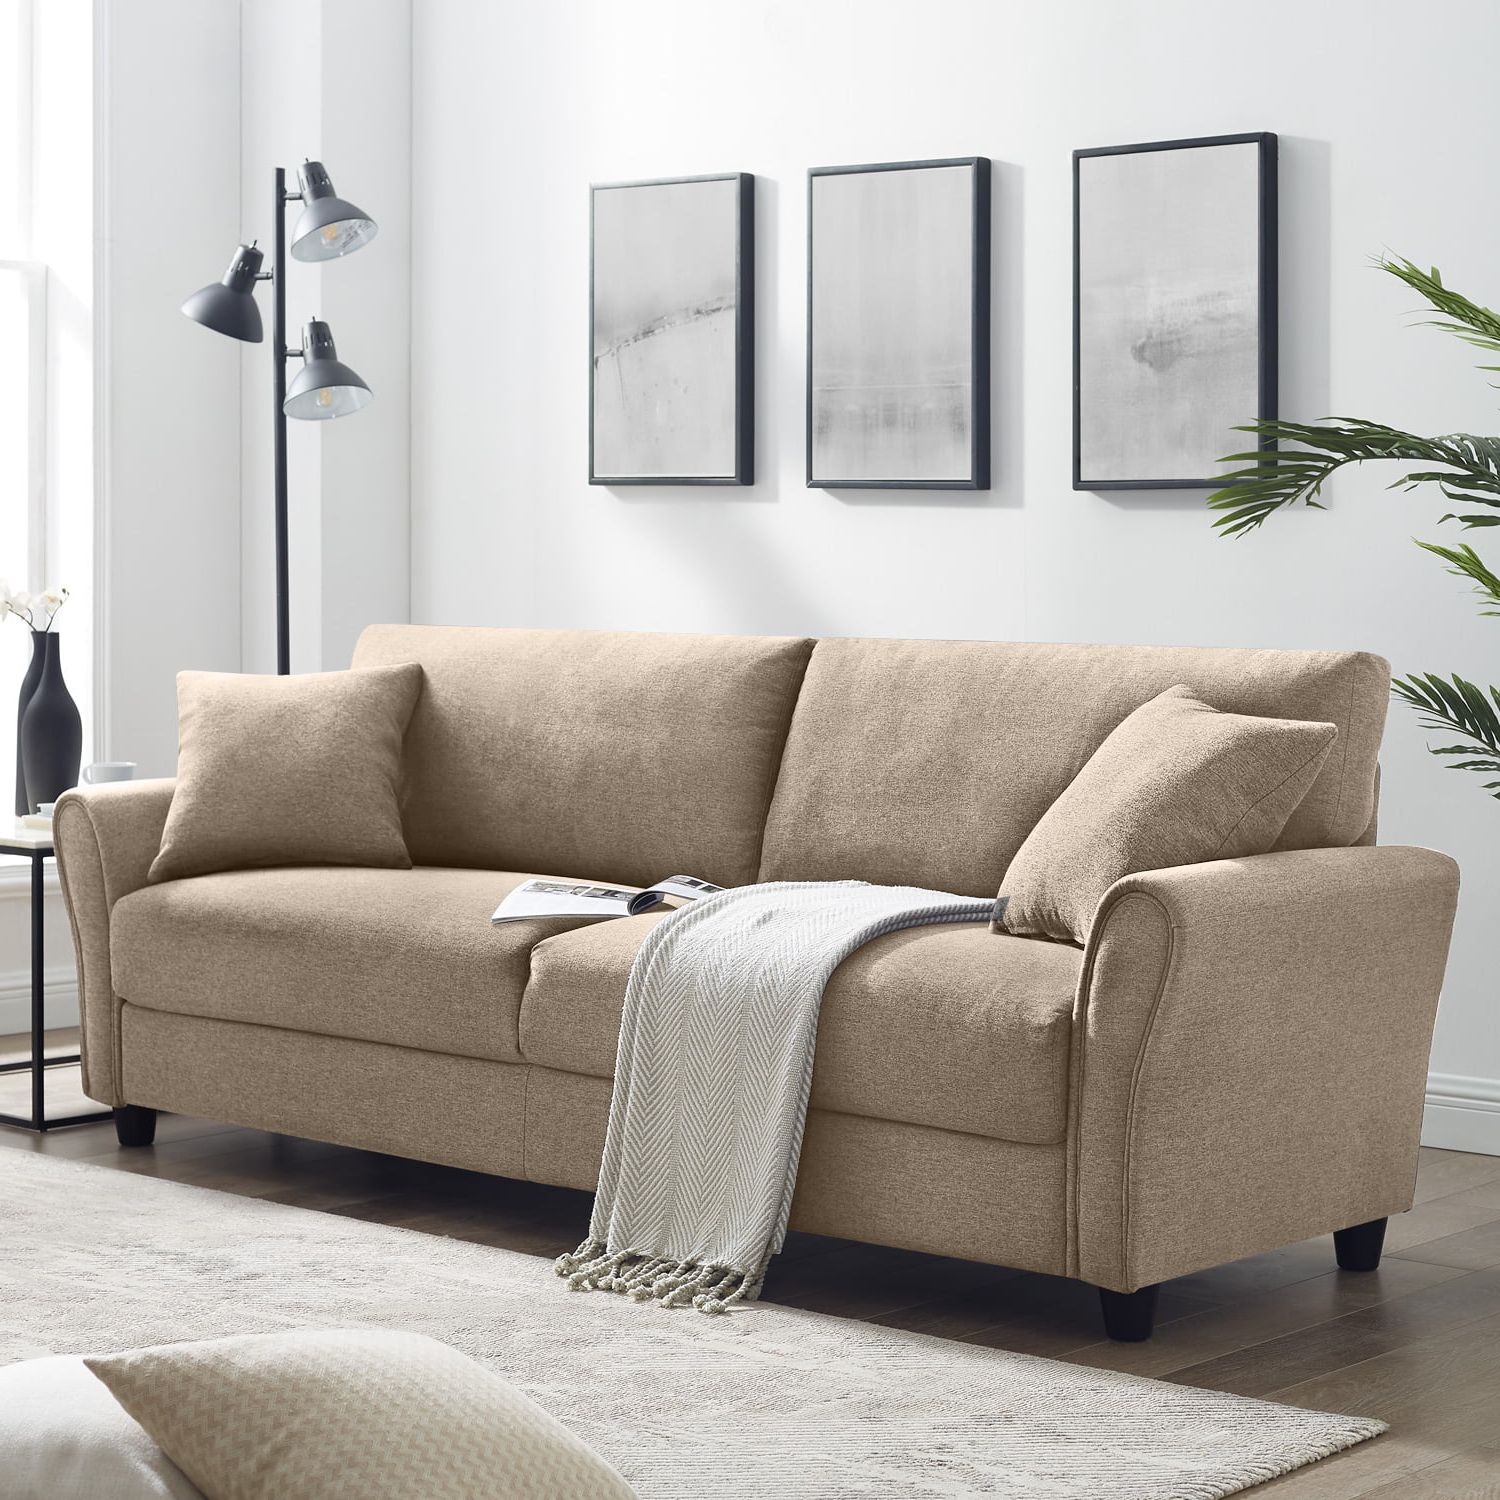 Upholstered 85 Inch Sofa Modern Linen Living Room Couch – Walmart For Sofas For Living Rooms (View 12 of 20)